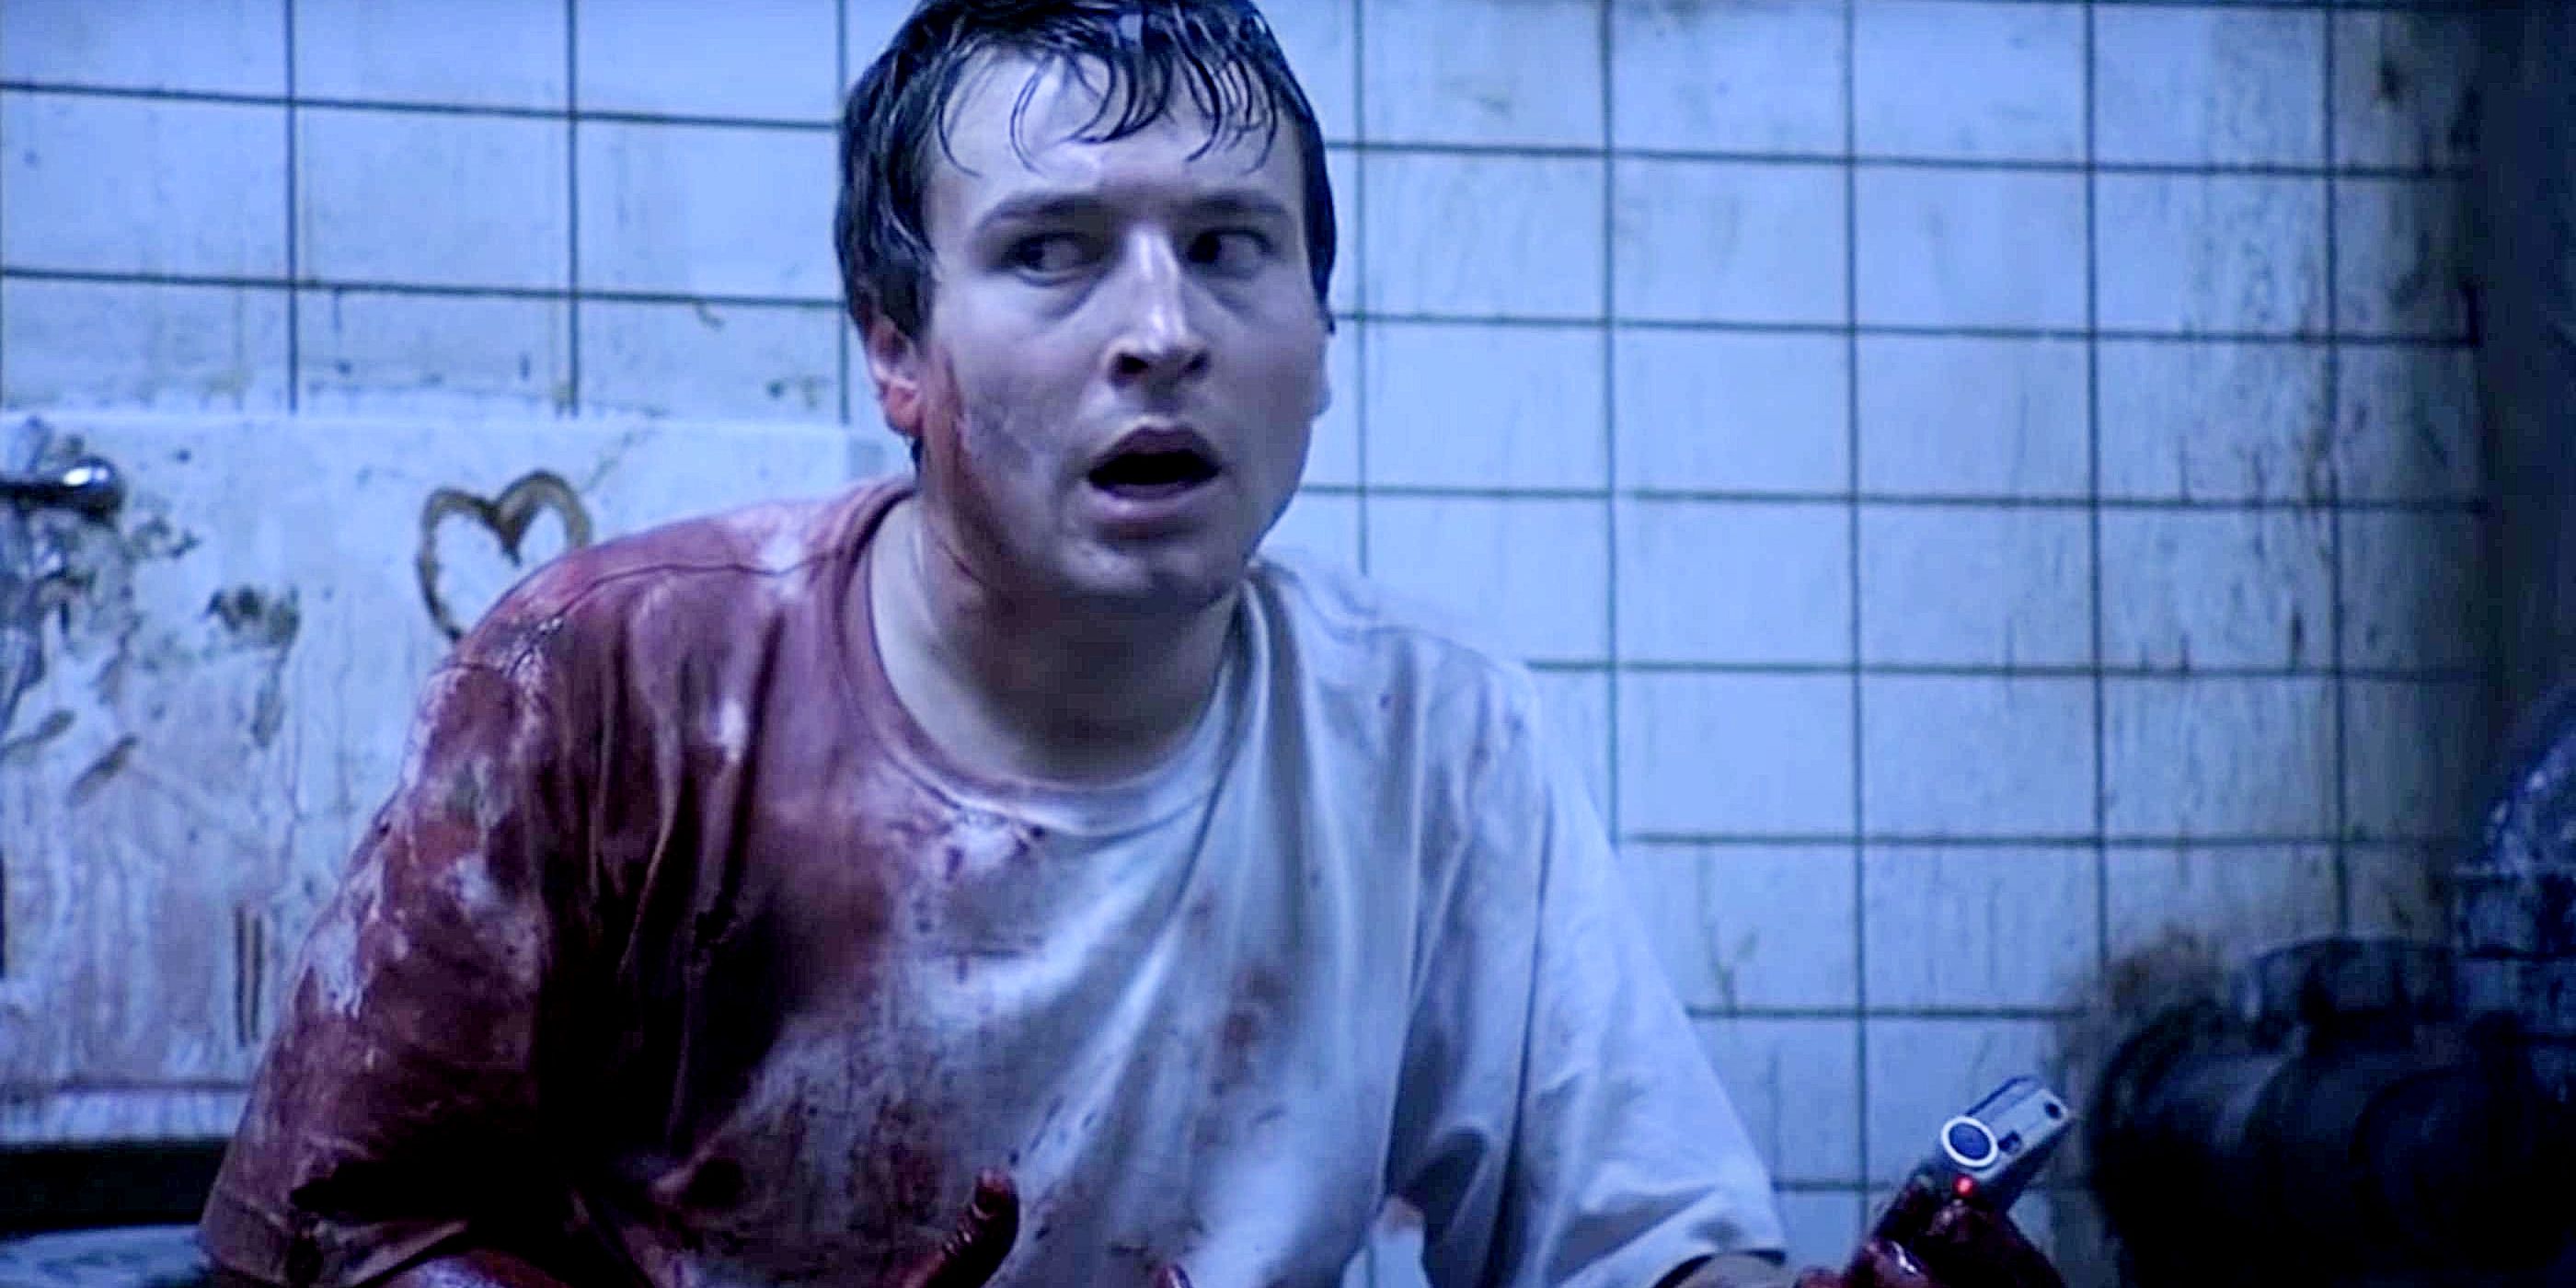 Adam looking shocked and covered in blood in Saw